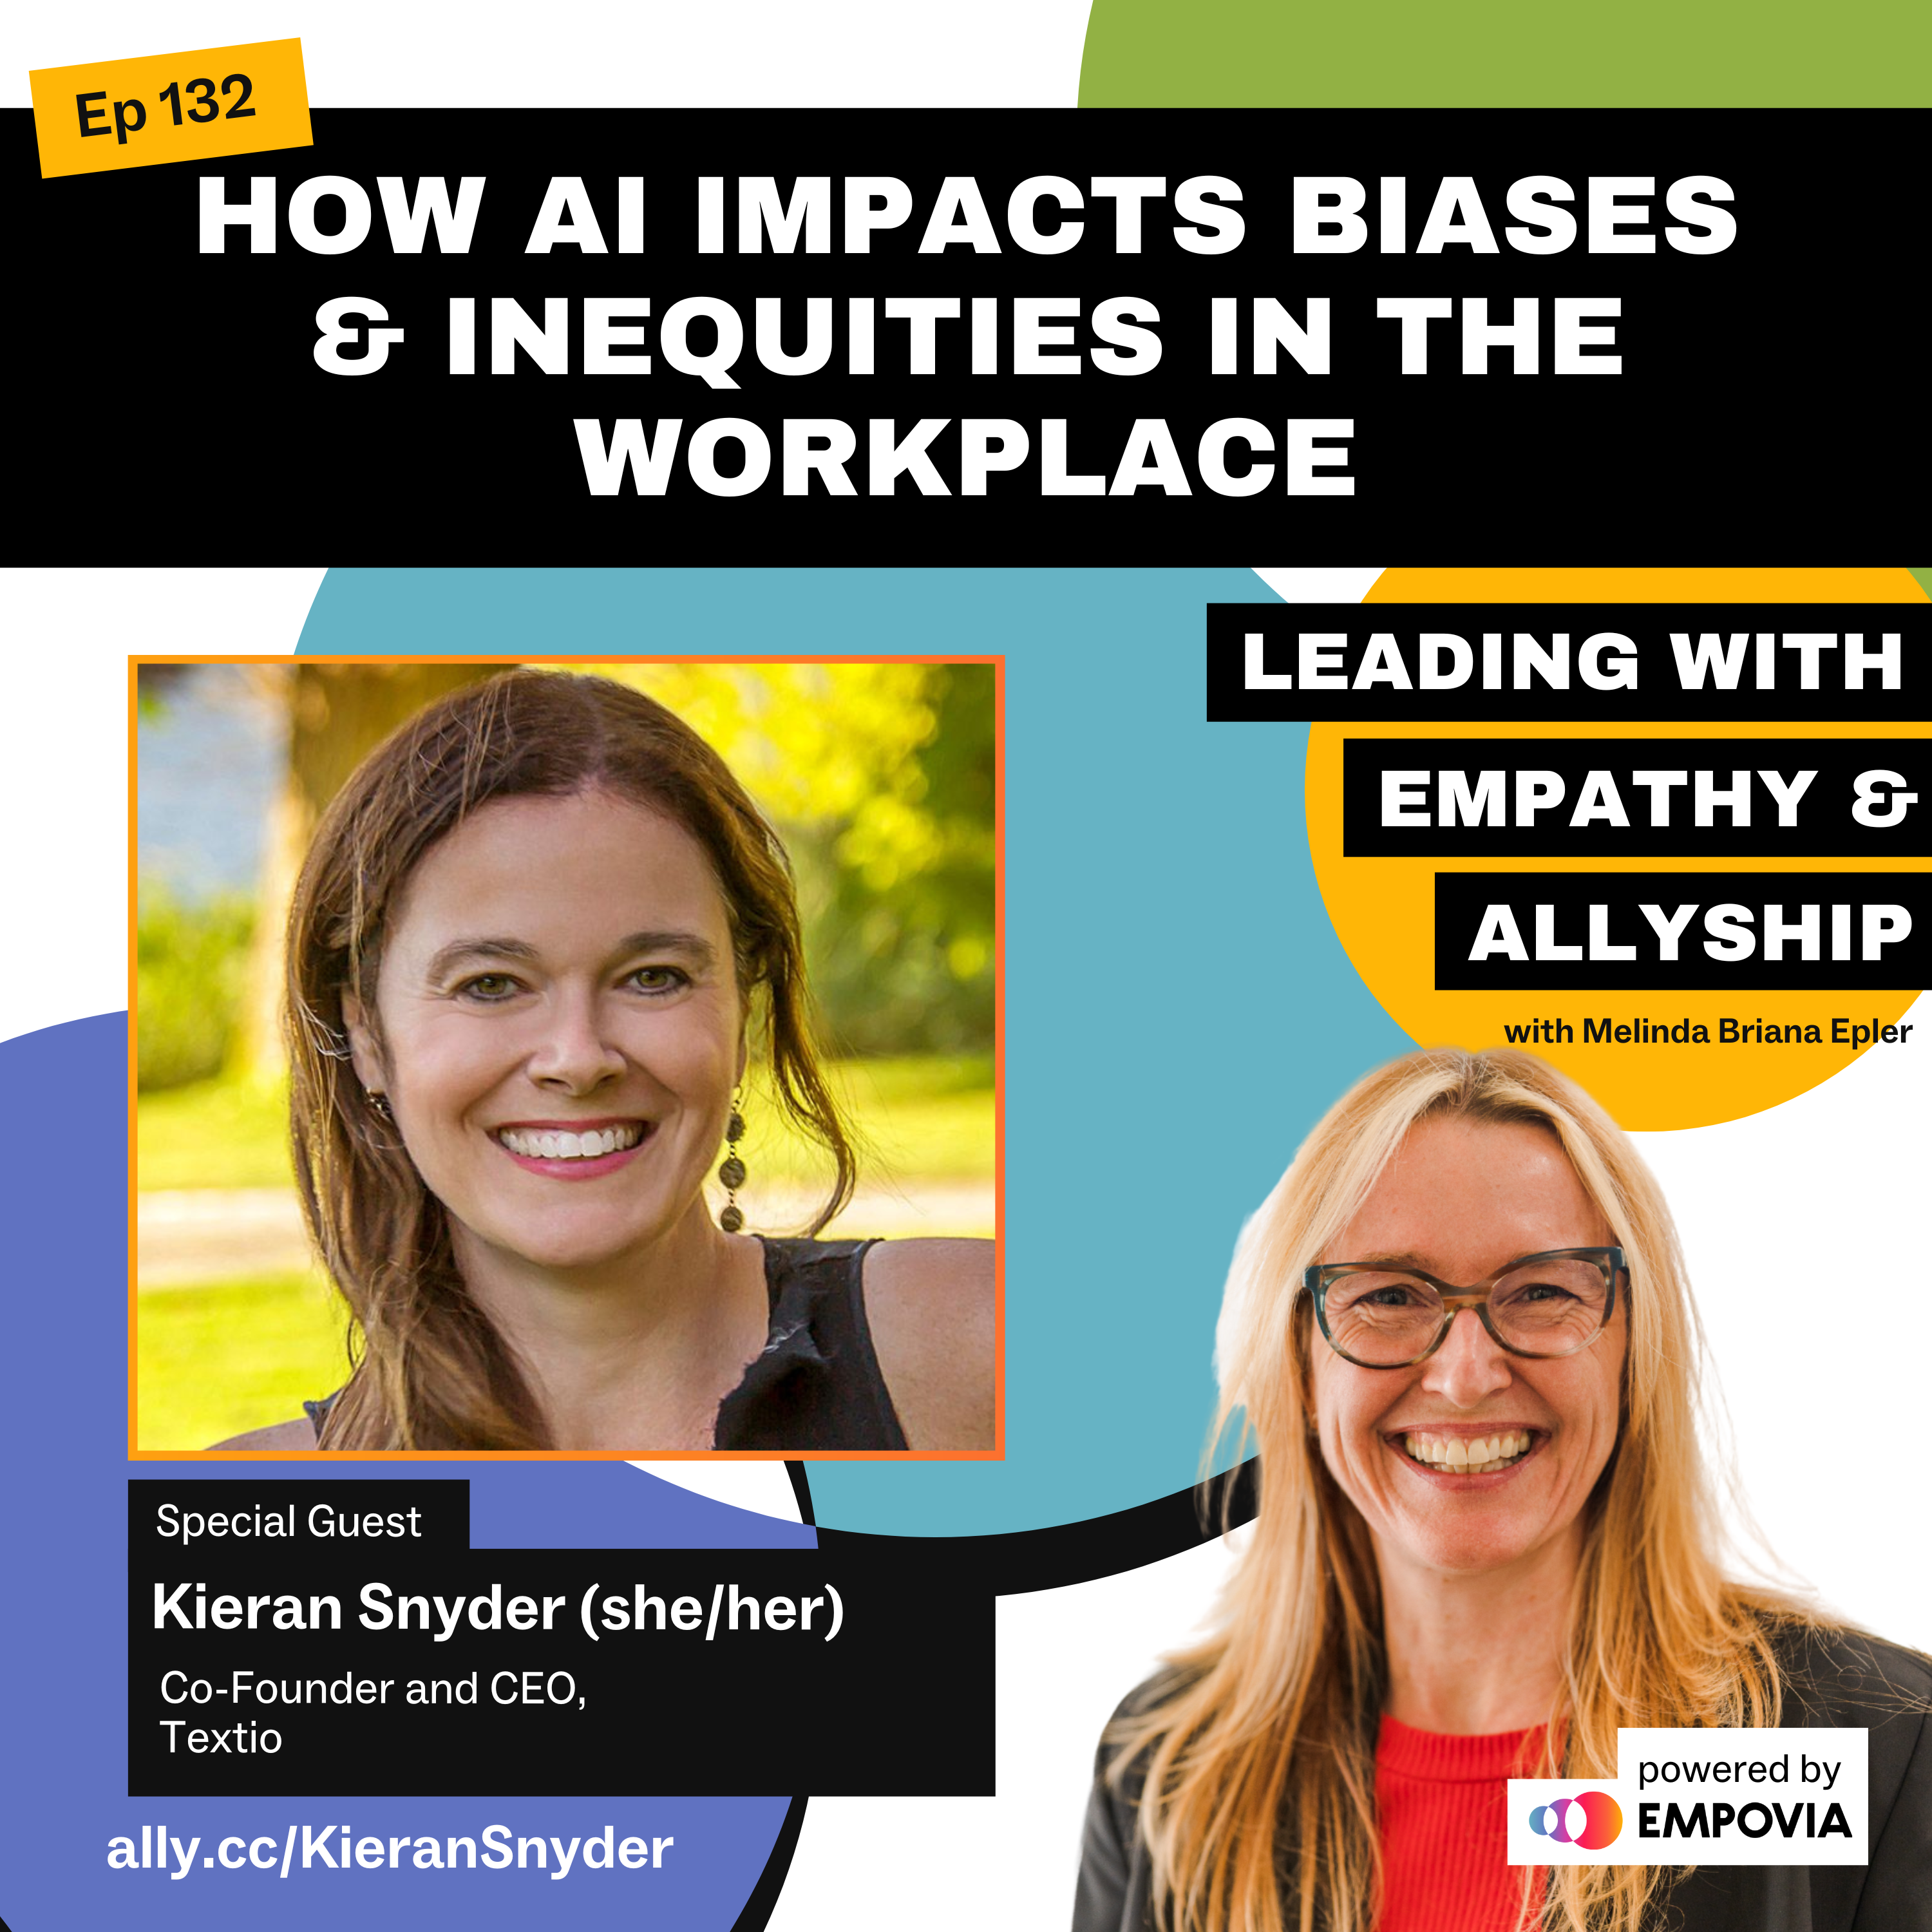 Leading With Empathy & Allyship promo and photos of Kieran Snyder, a White woman with long brown hair, drop earrings, and black top; and host Melinda Briana Epler, a White woman with blonde and red hair, glasses, red shirt, and black jacket.